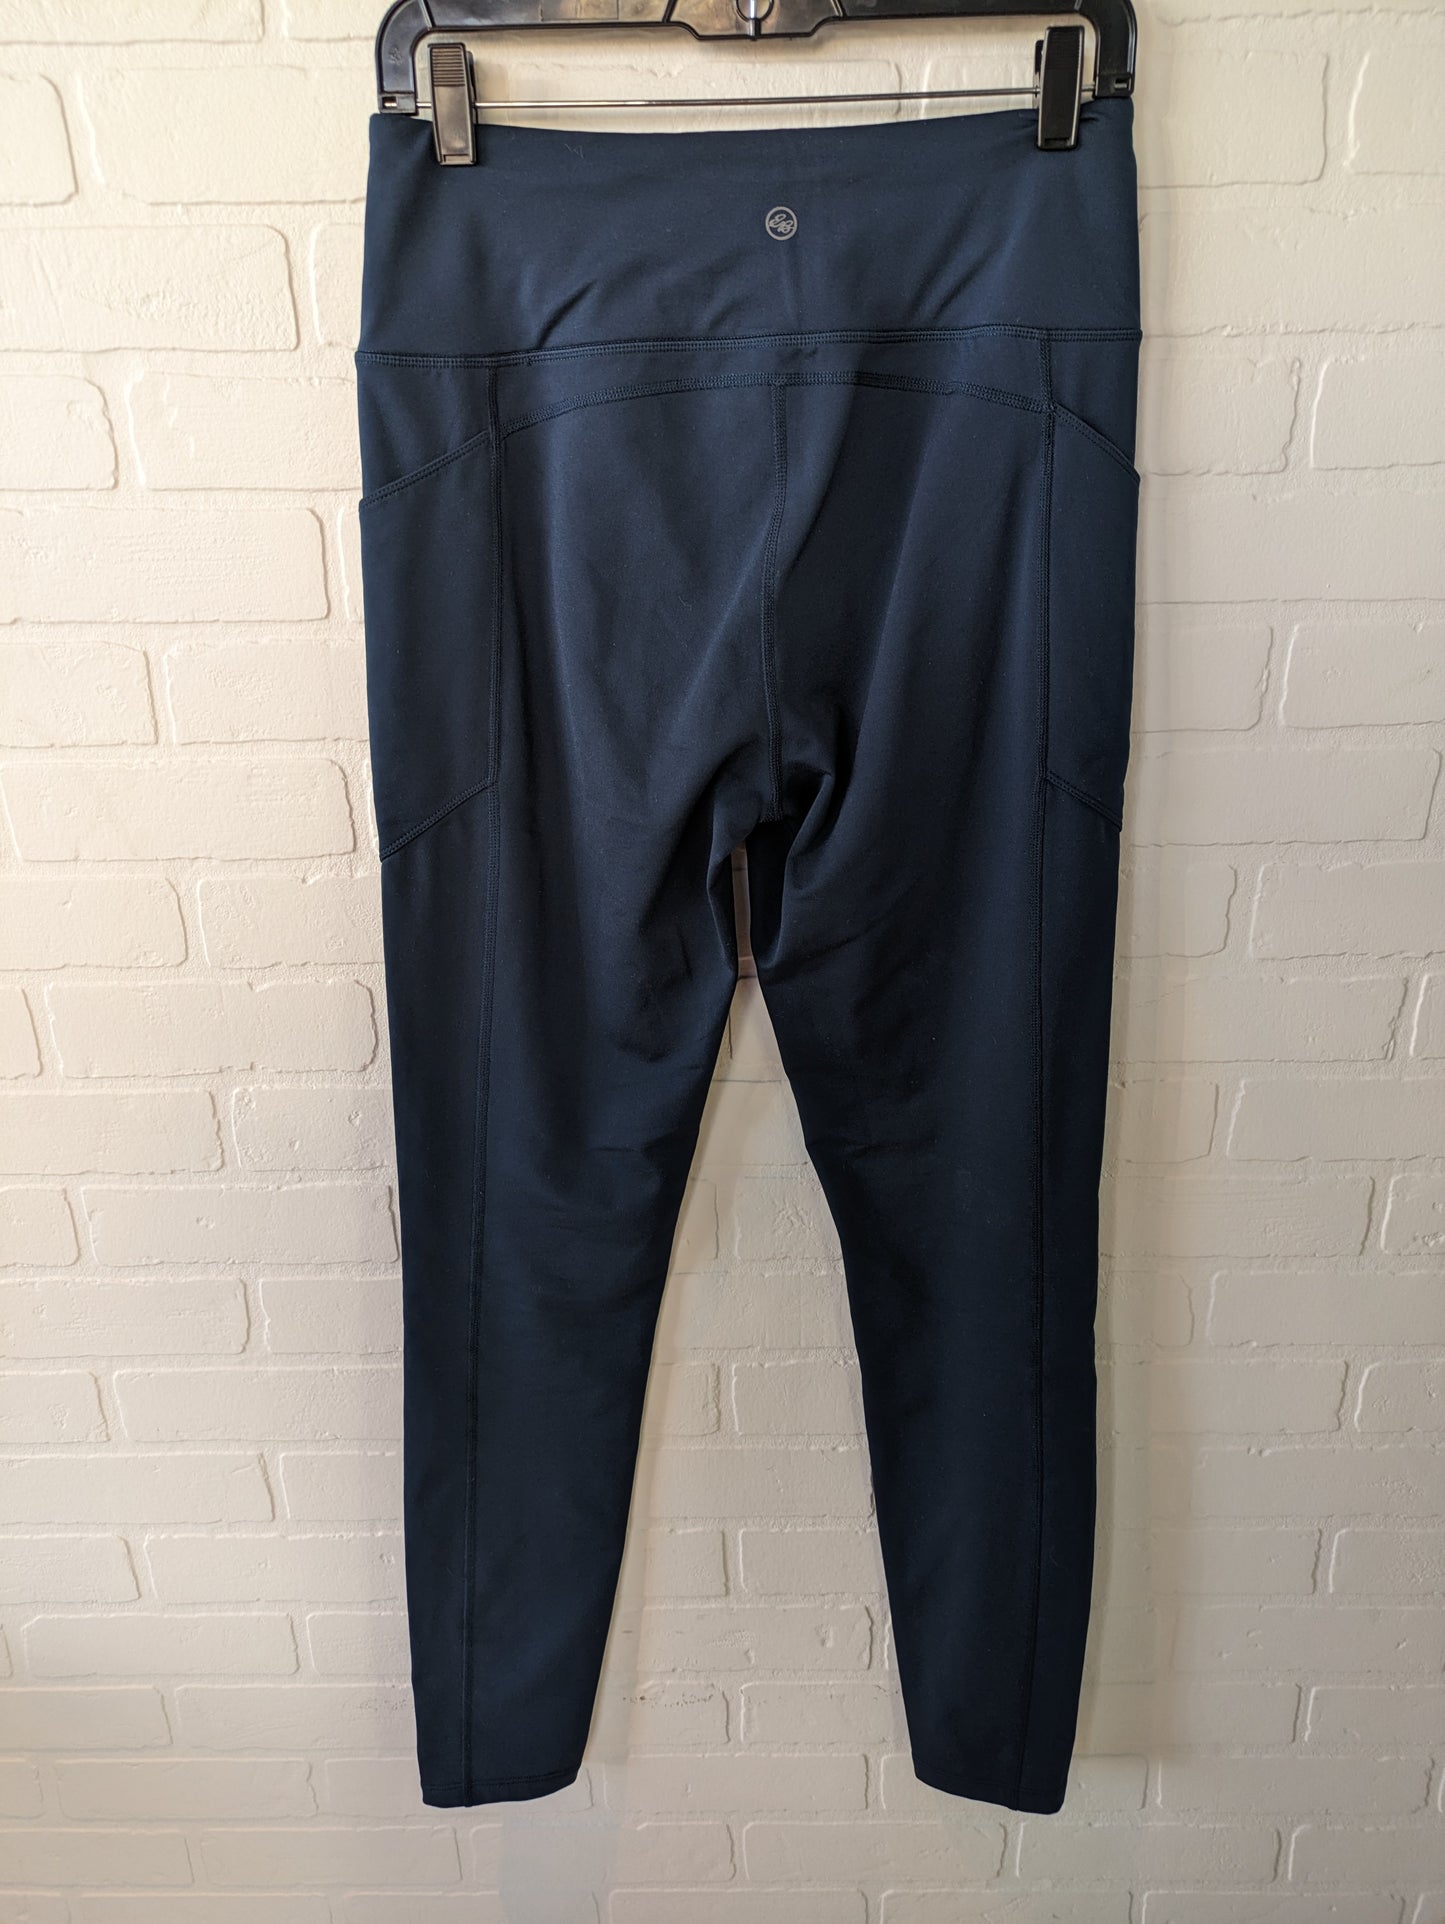 Athletic Leggings By Eddie Bauer  Size: 8tall